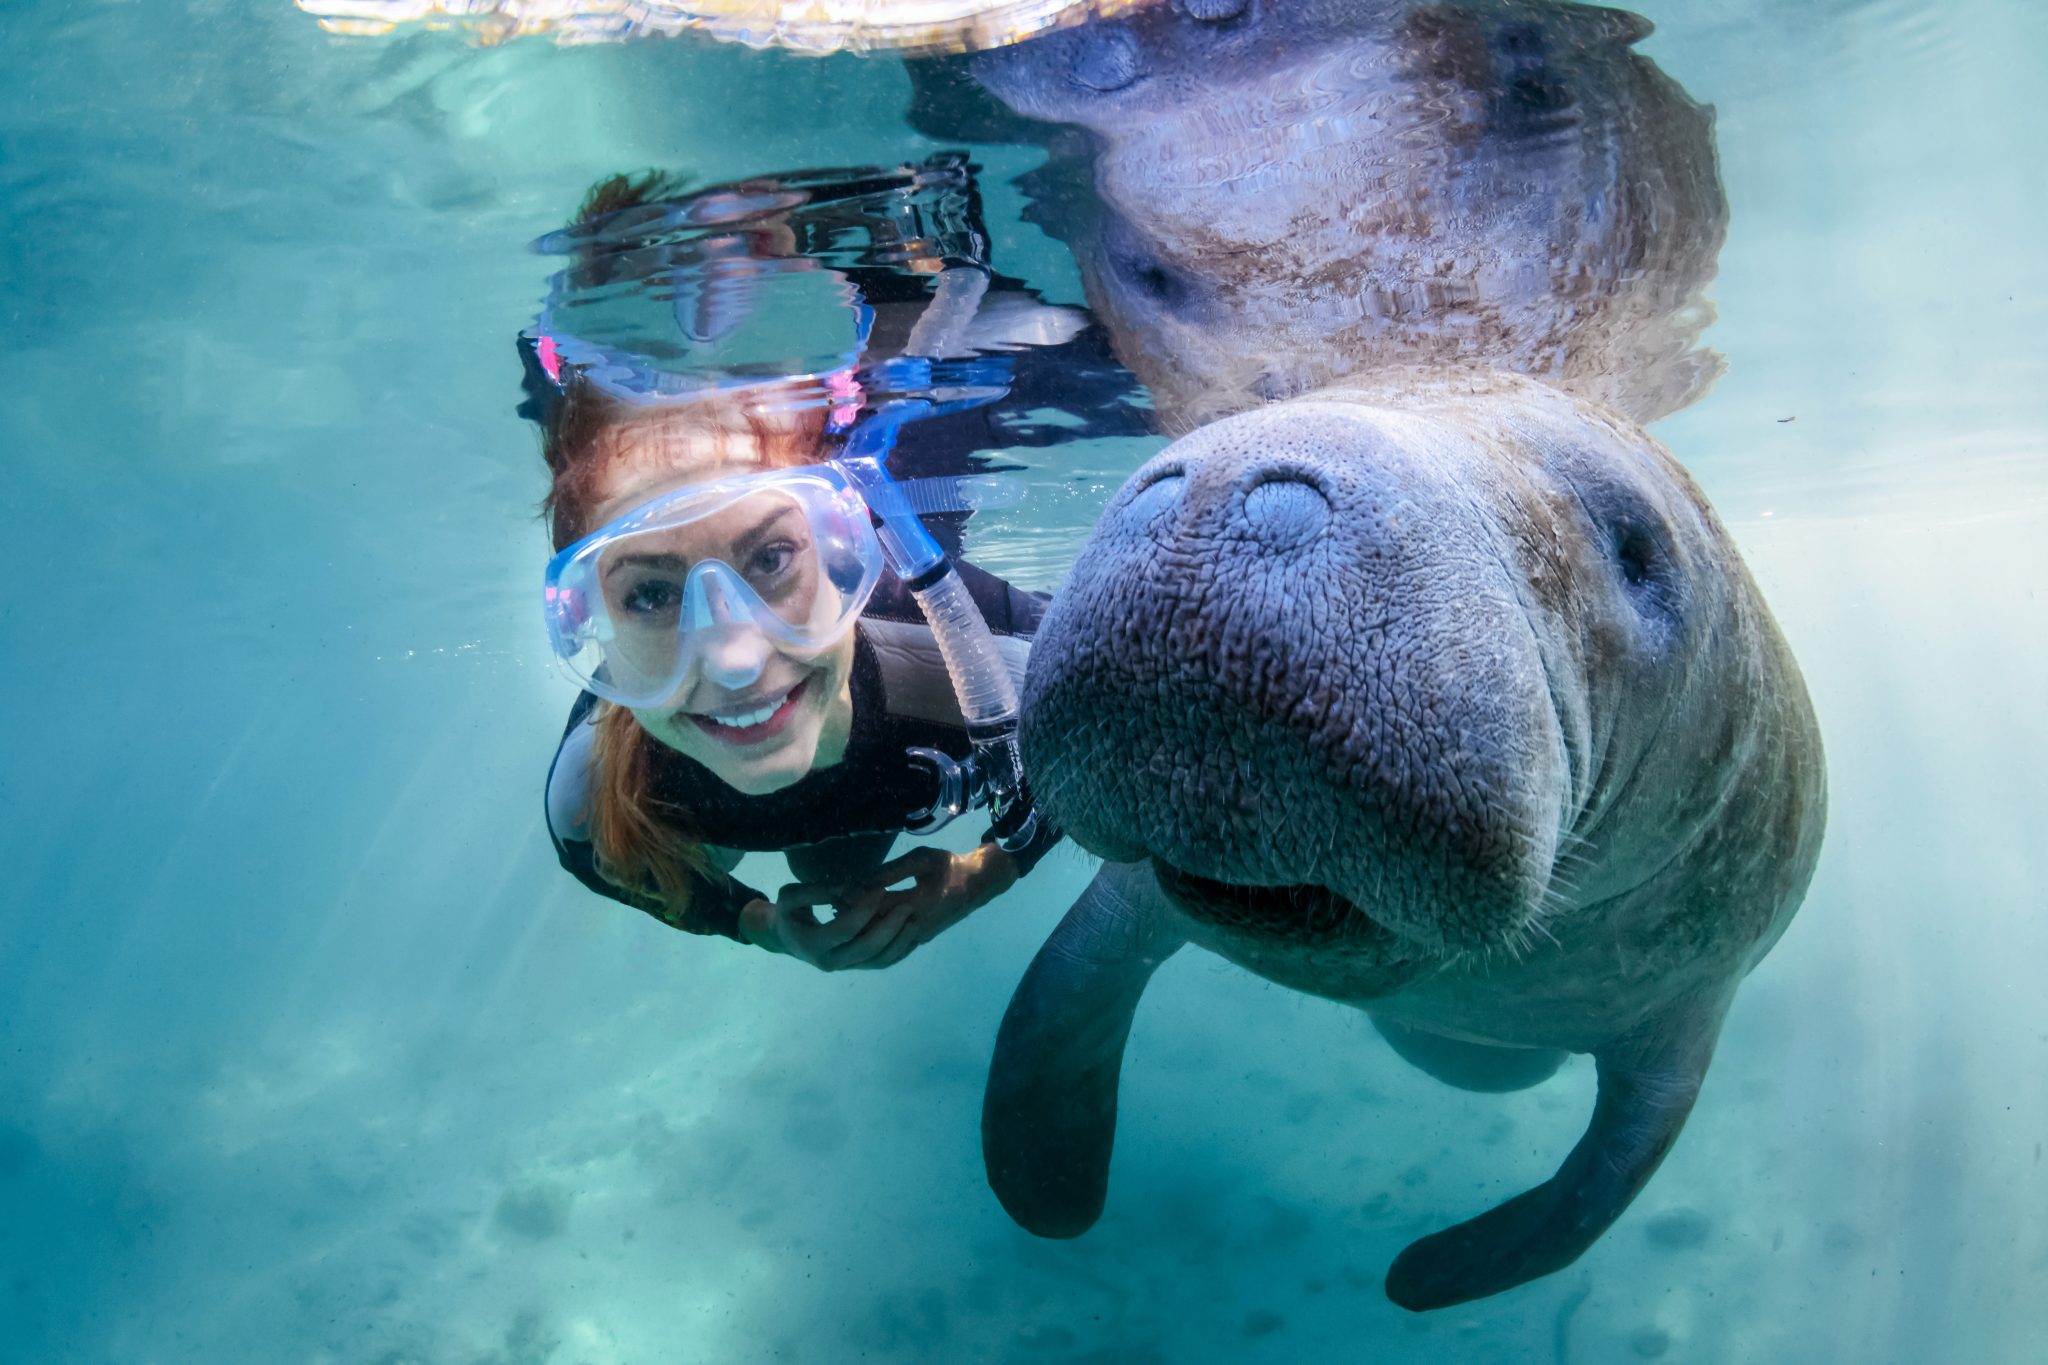 manatee tours in crystal river